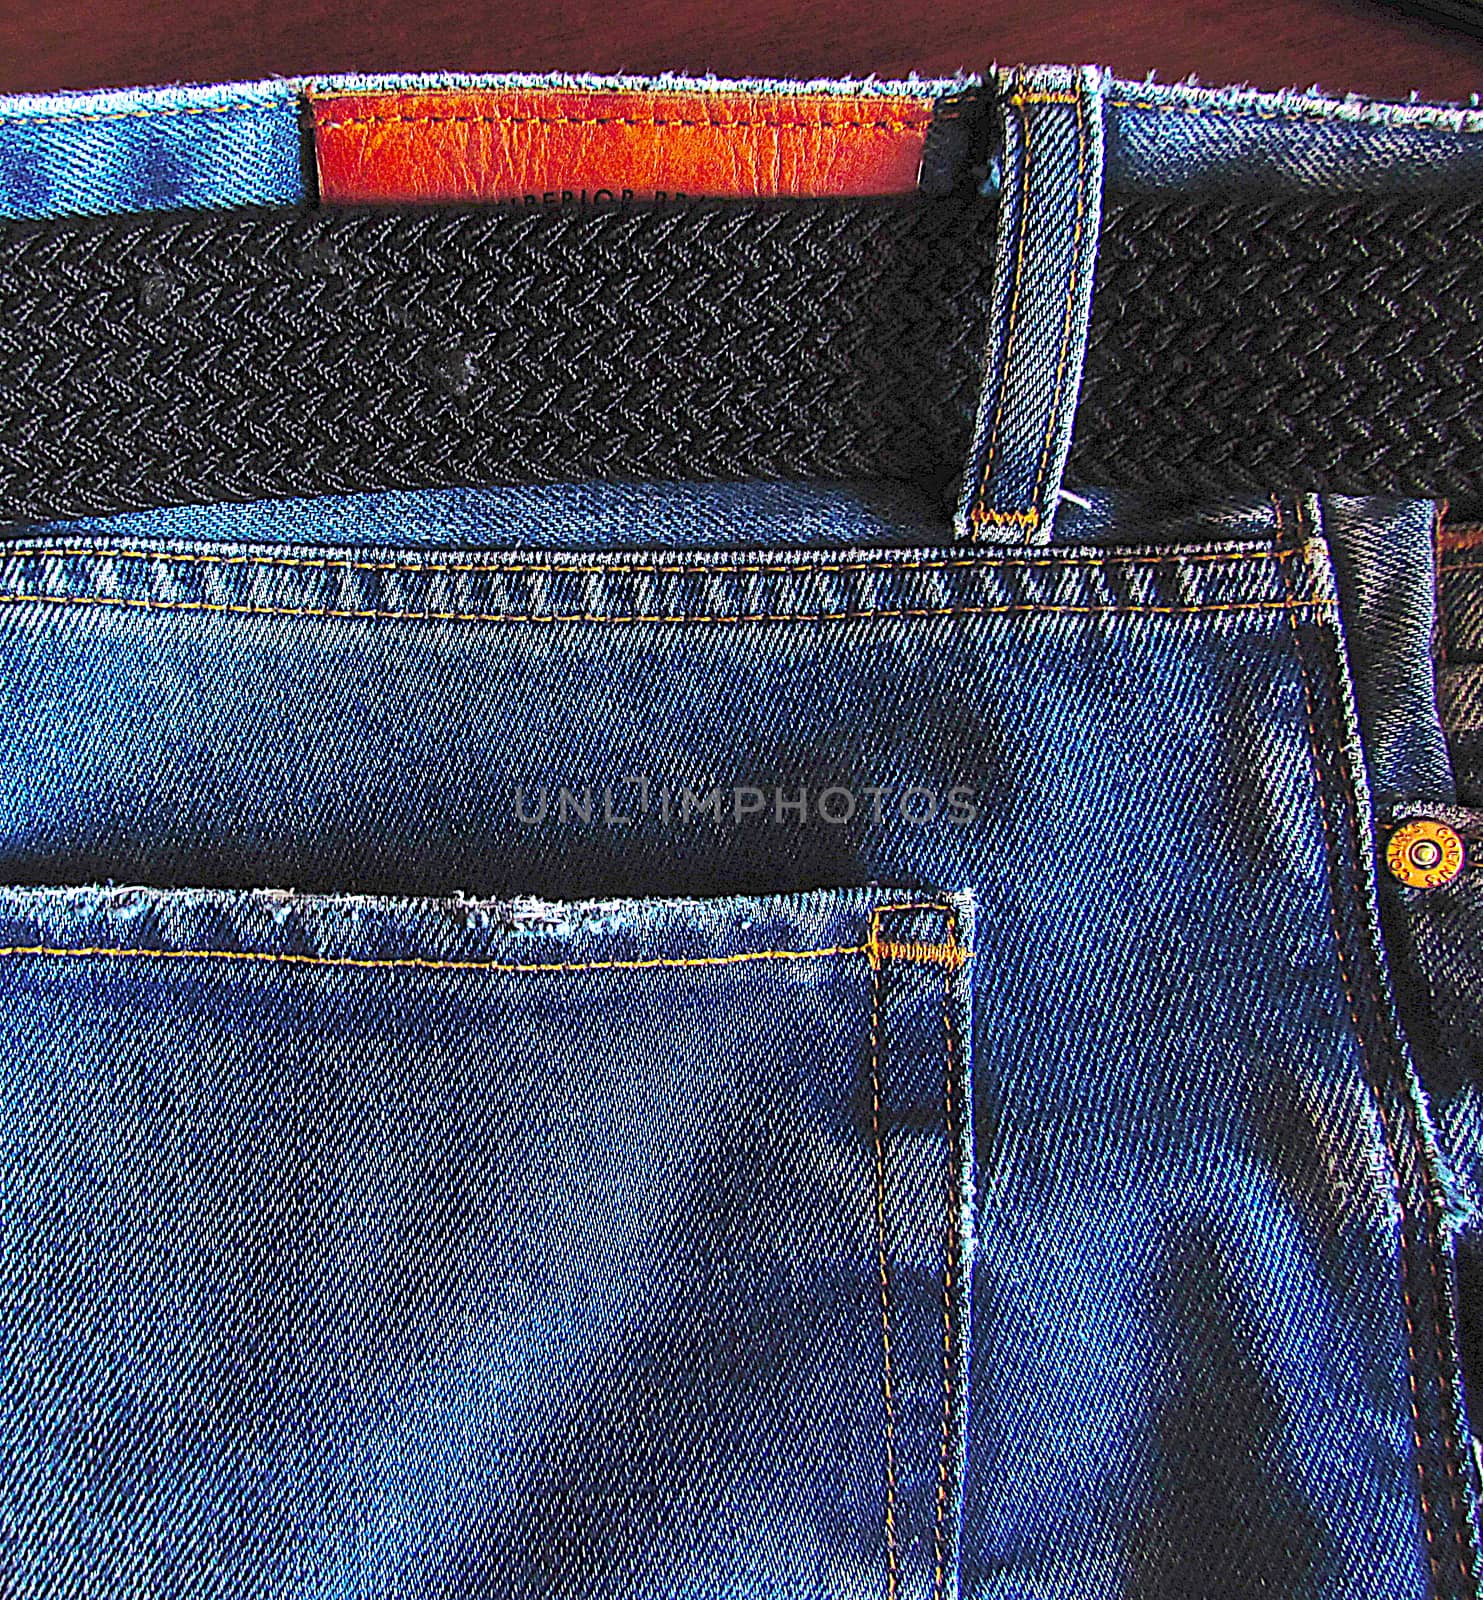 texture of denim, denim material with pockets and a fabric belt close-up